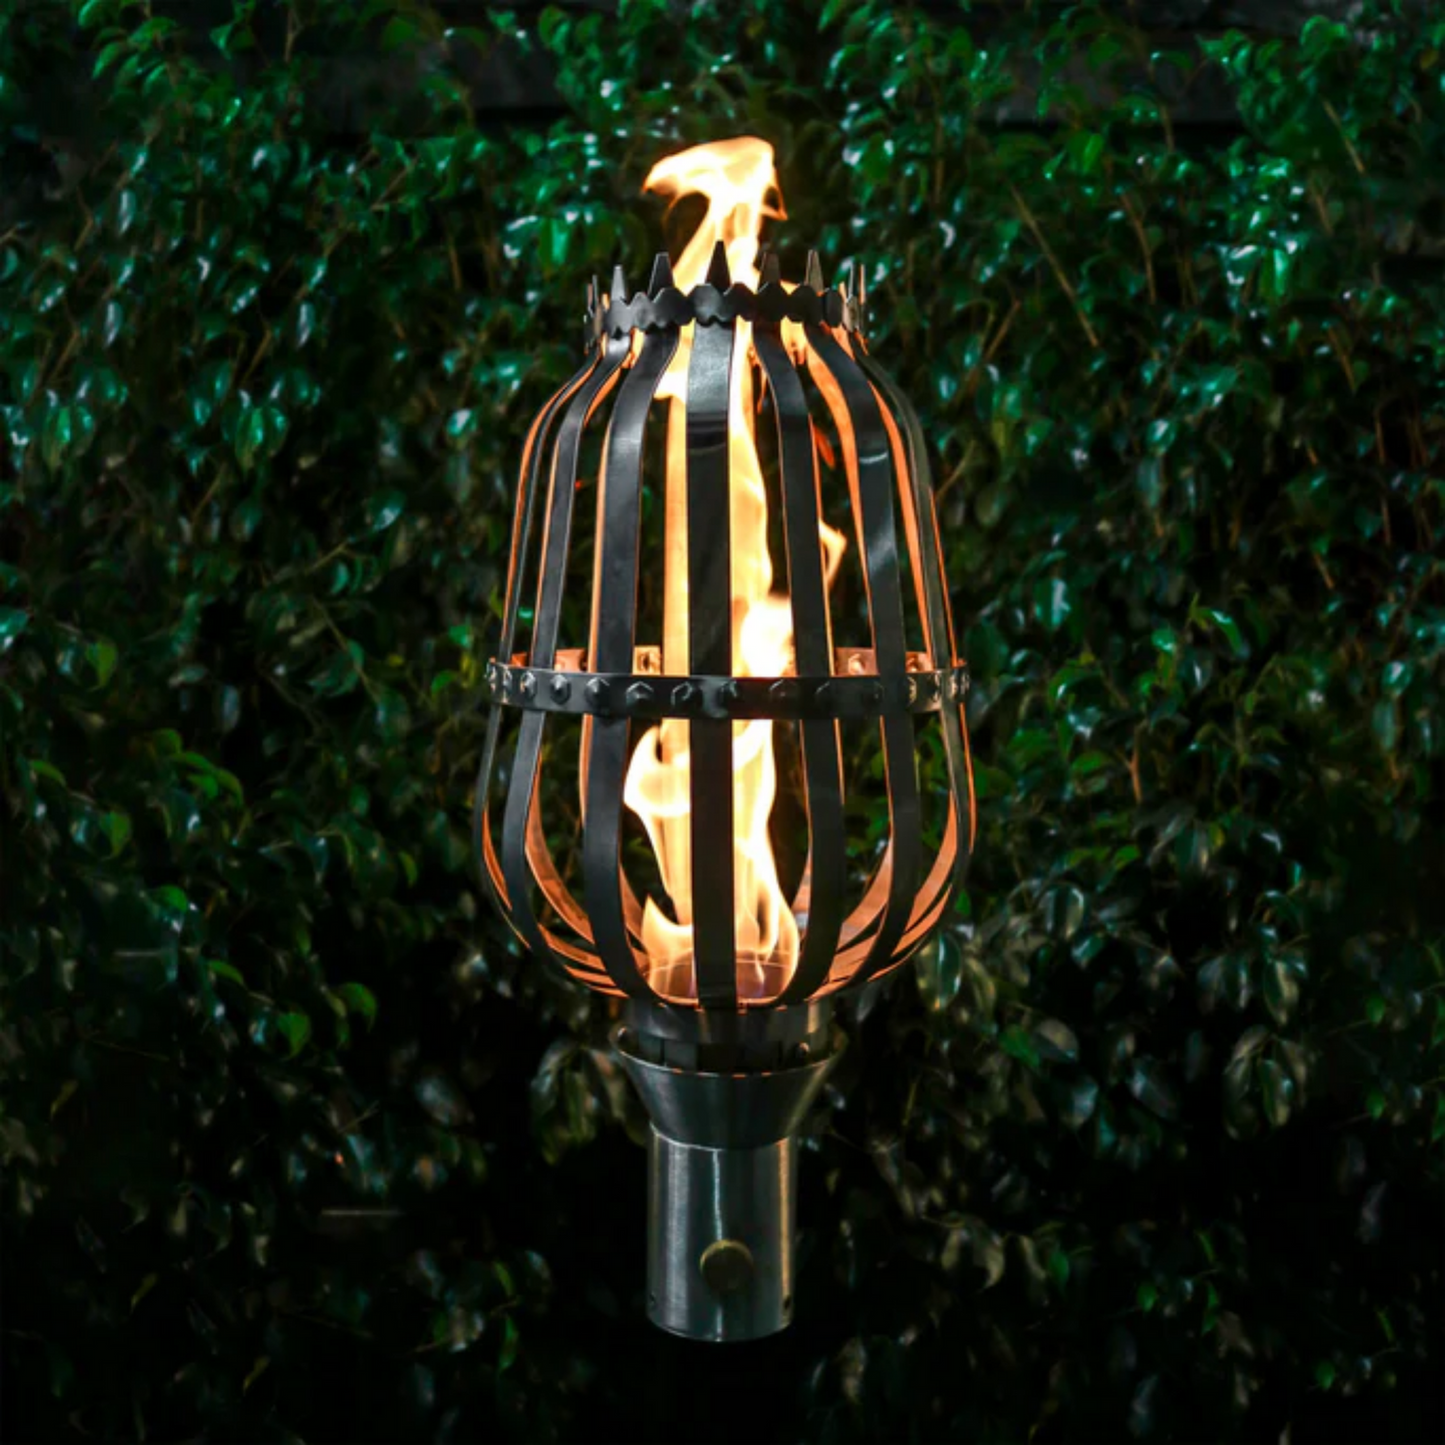 Backyard Tiki Torch The Outdoor Plus, Urn Original TOP Torch & Post Complete - Stainless Steel - Natural Gas | OPT-TPK10NG